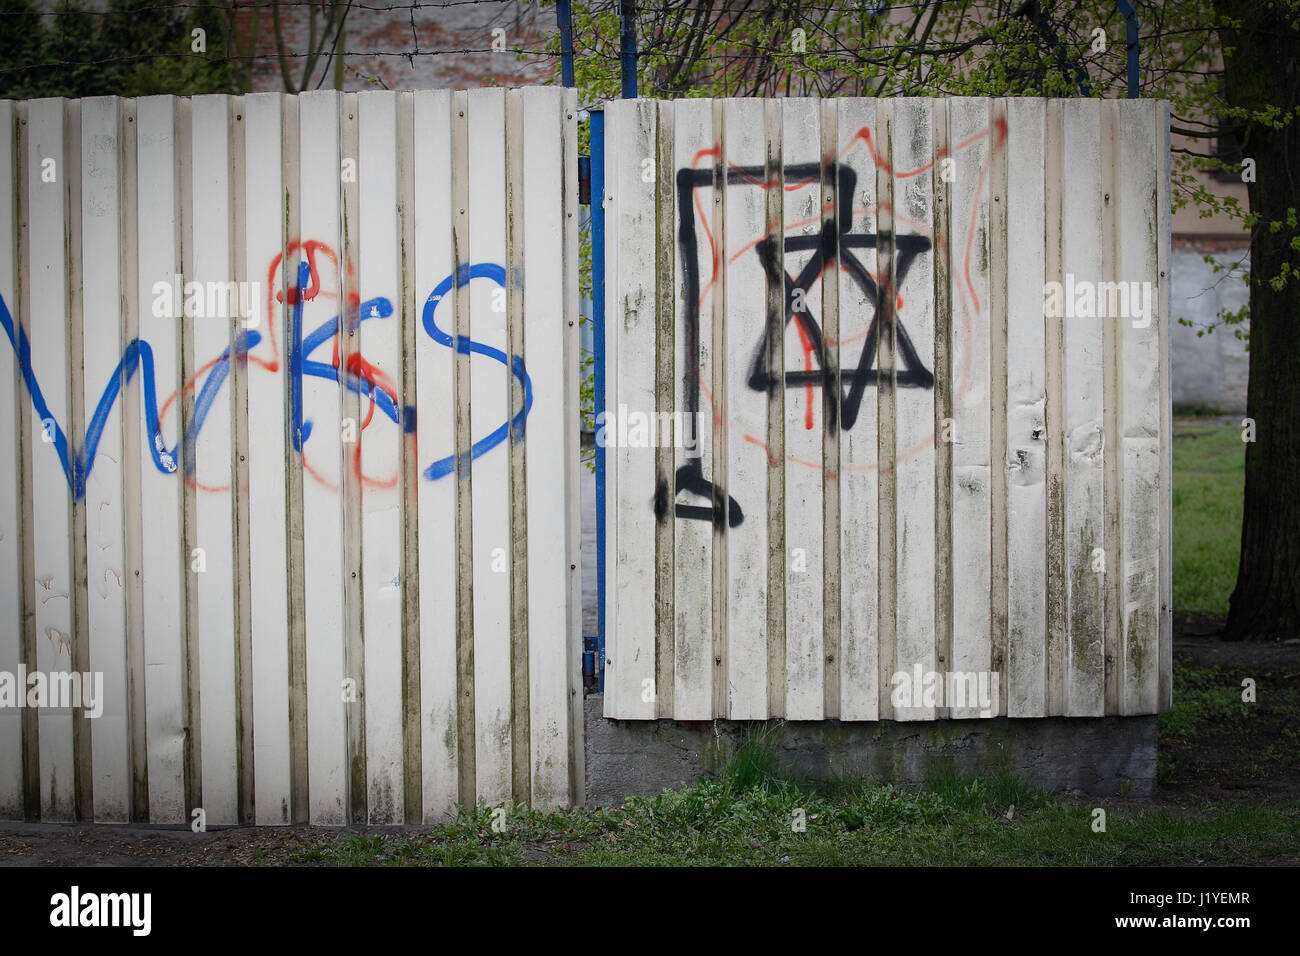 Bydgoszcz, Poland. 22nd April, 2017. A star of David is seen depicted hanging from a gallows indicating antisemitic symbolism. Since the end of 2015 w Stock Photo